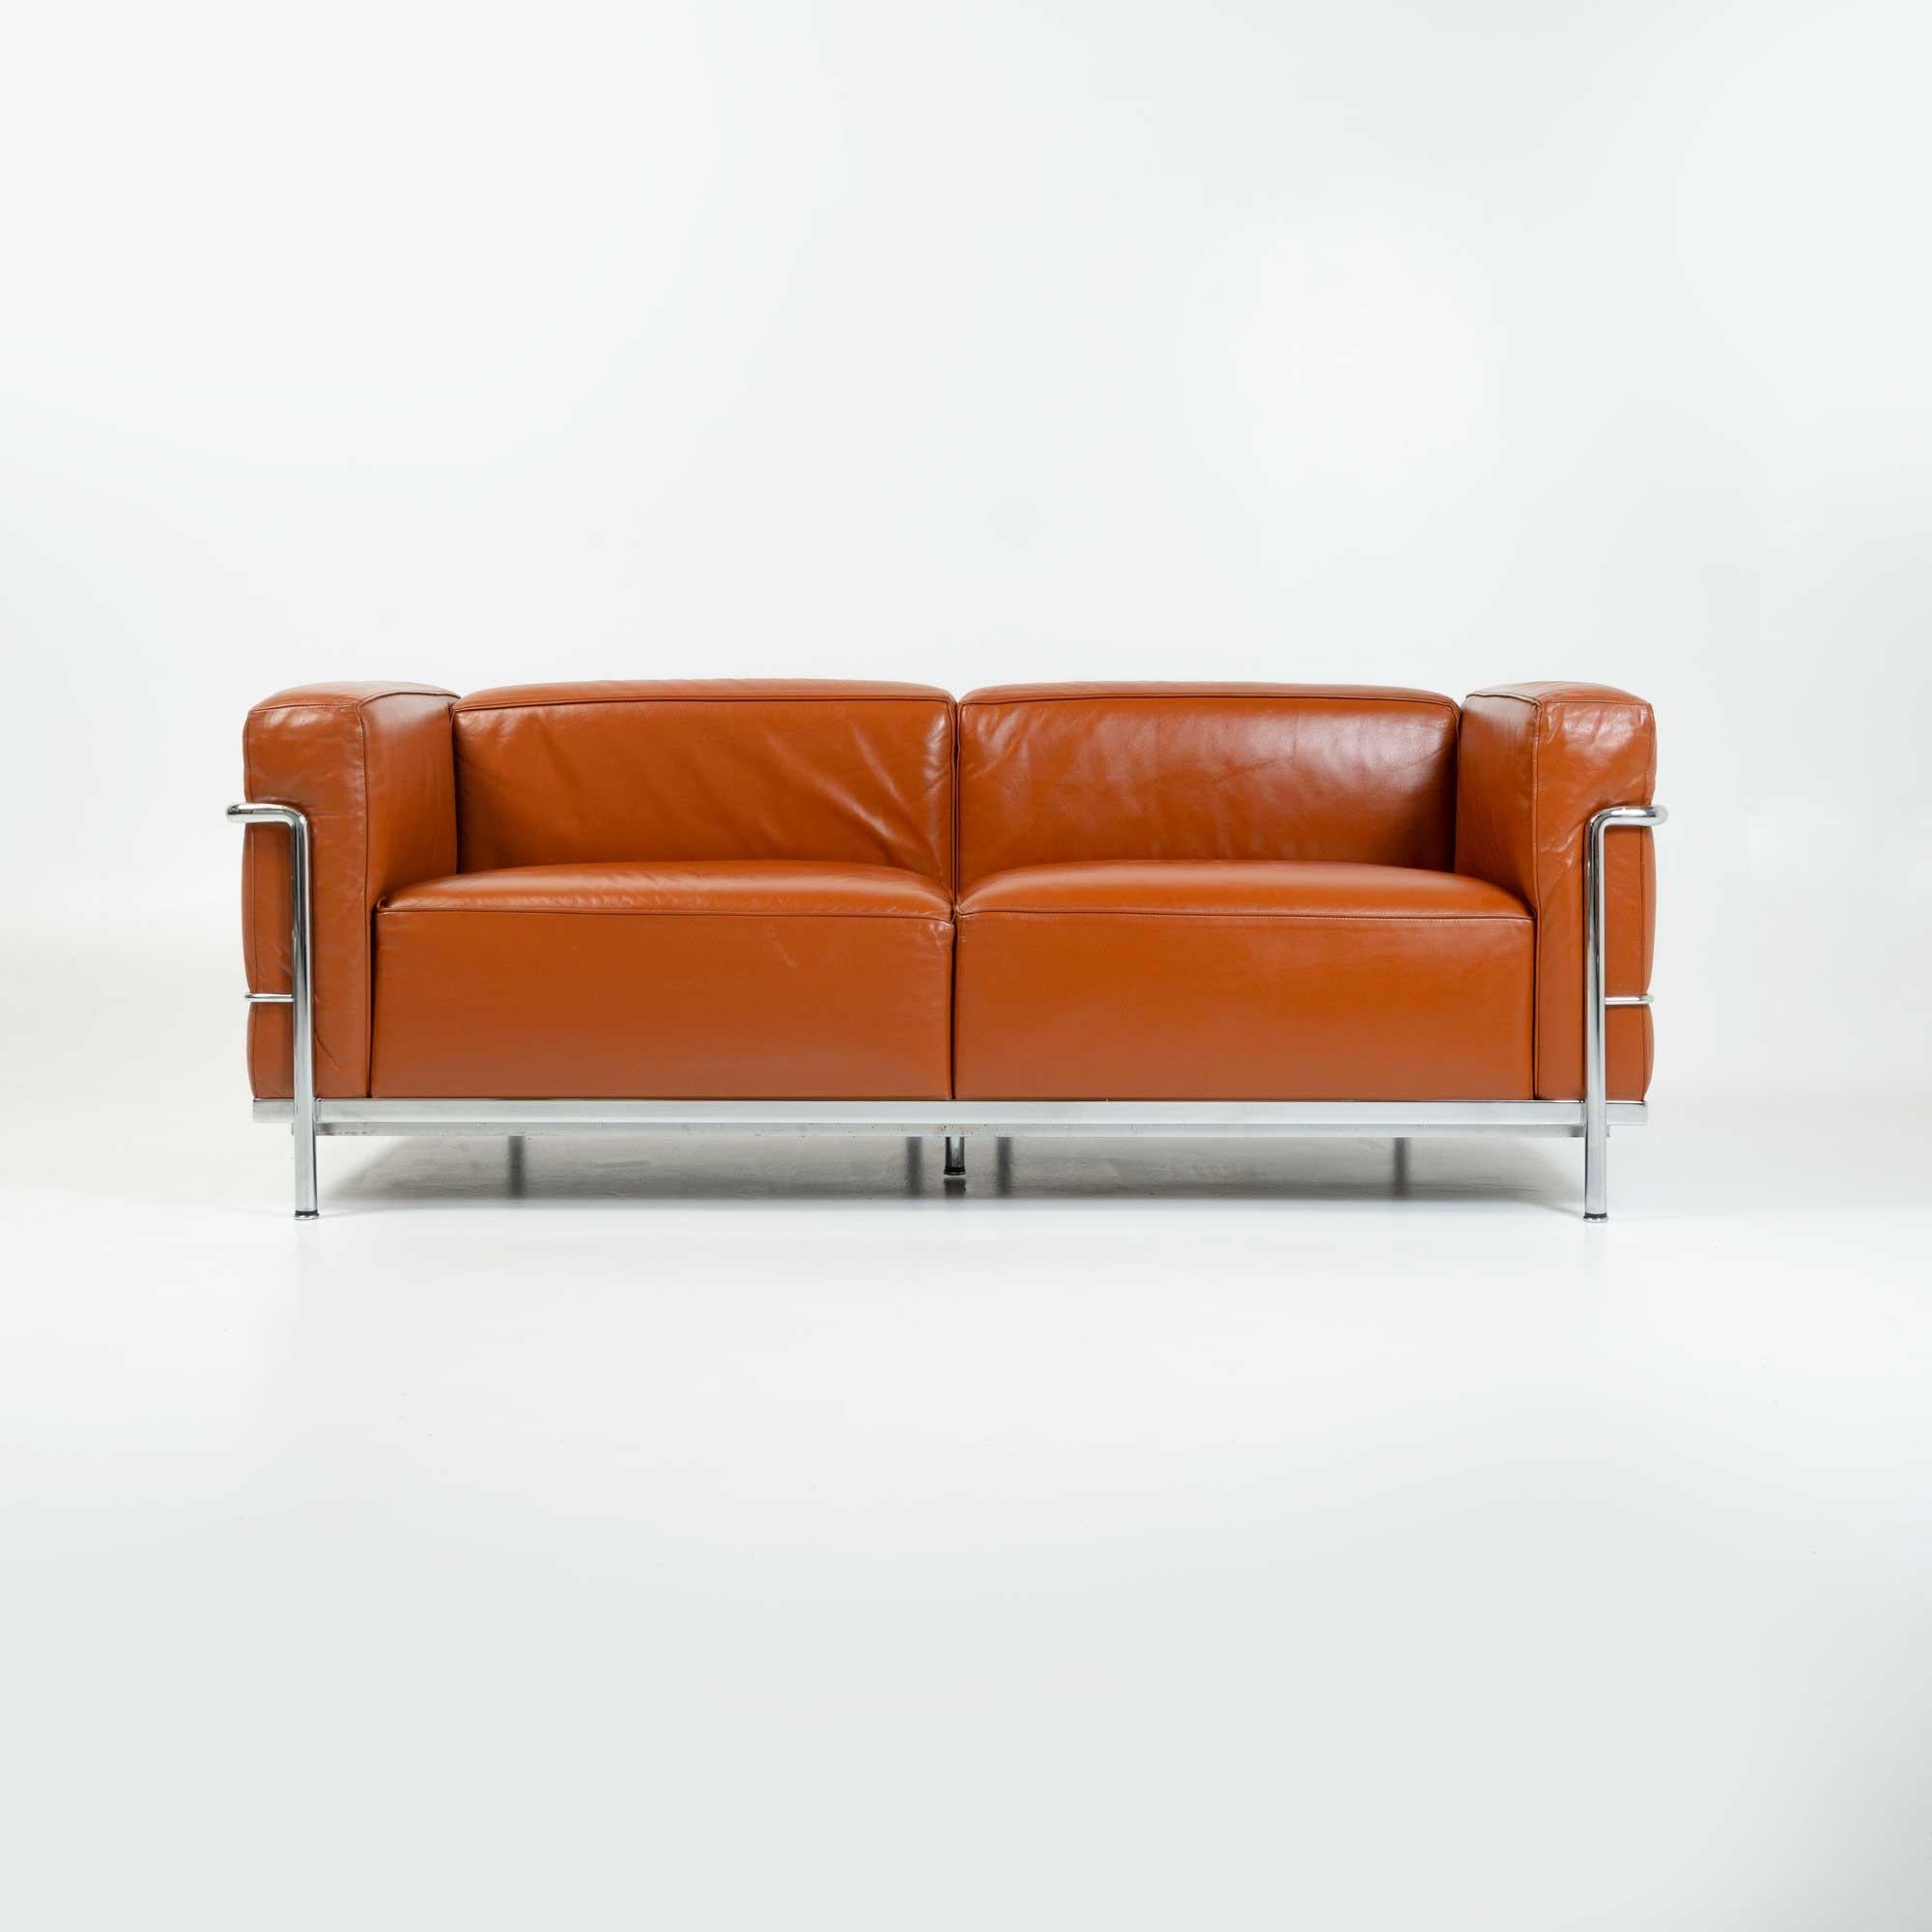 Iconic Bauhaus design by the Swiss-born architect Le Corbusier (Charles-Edouard Jeanneret) are the LC2 and LC3 armchairs, as well as the LC3 sofa.

This is an exceptional LC3 Grand Model Sofa in Original Tobacco Leather and Chrome Frame. Cassina